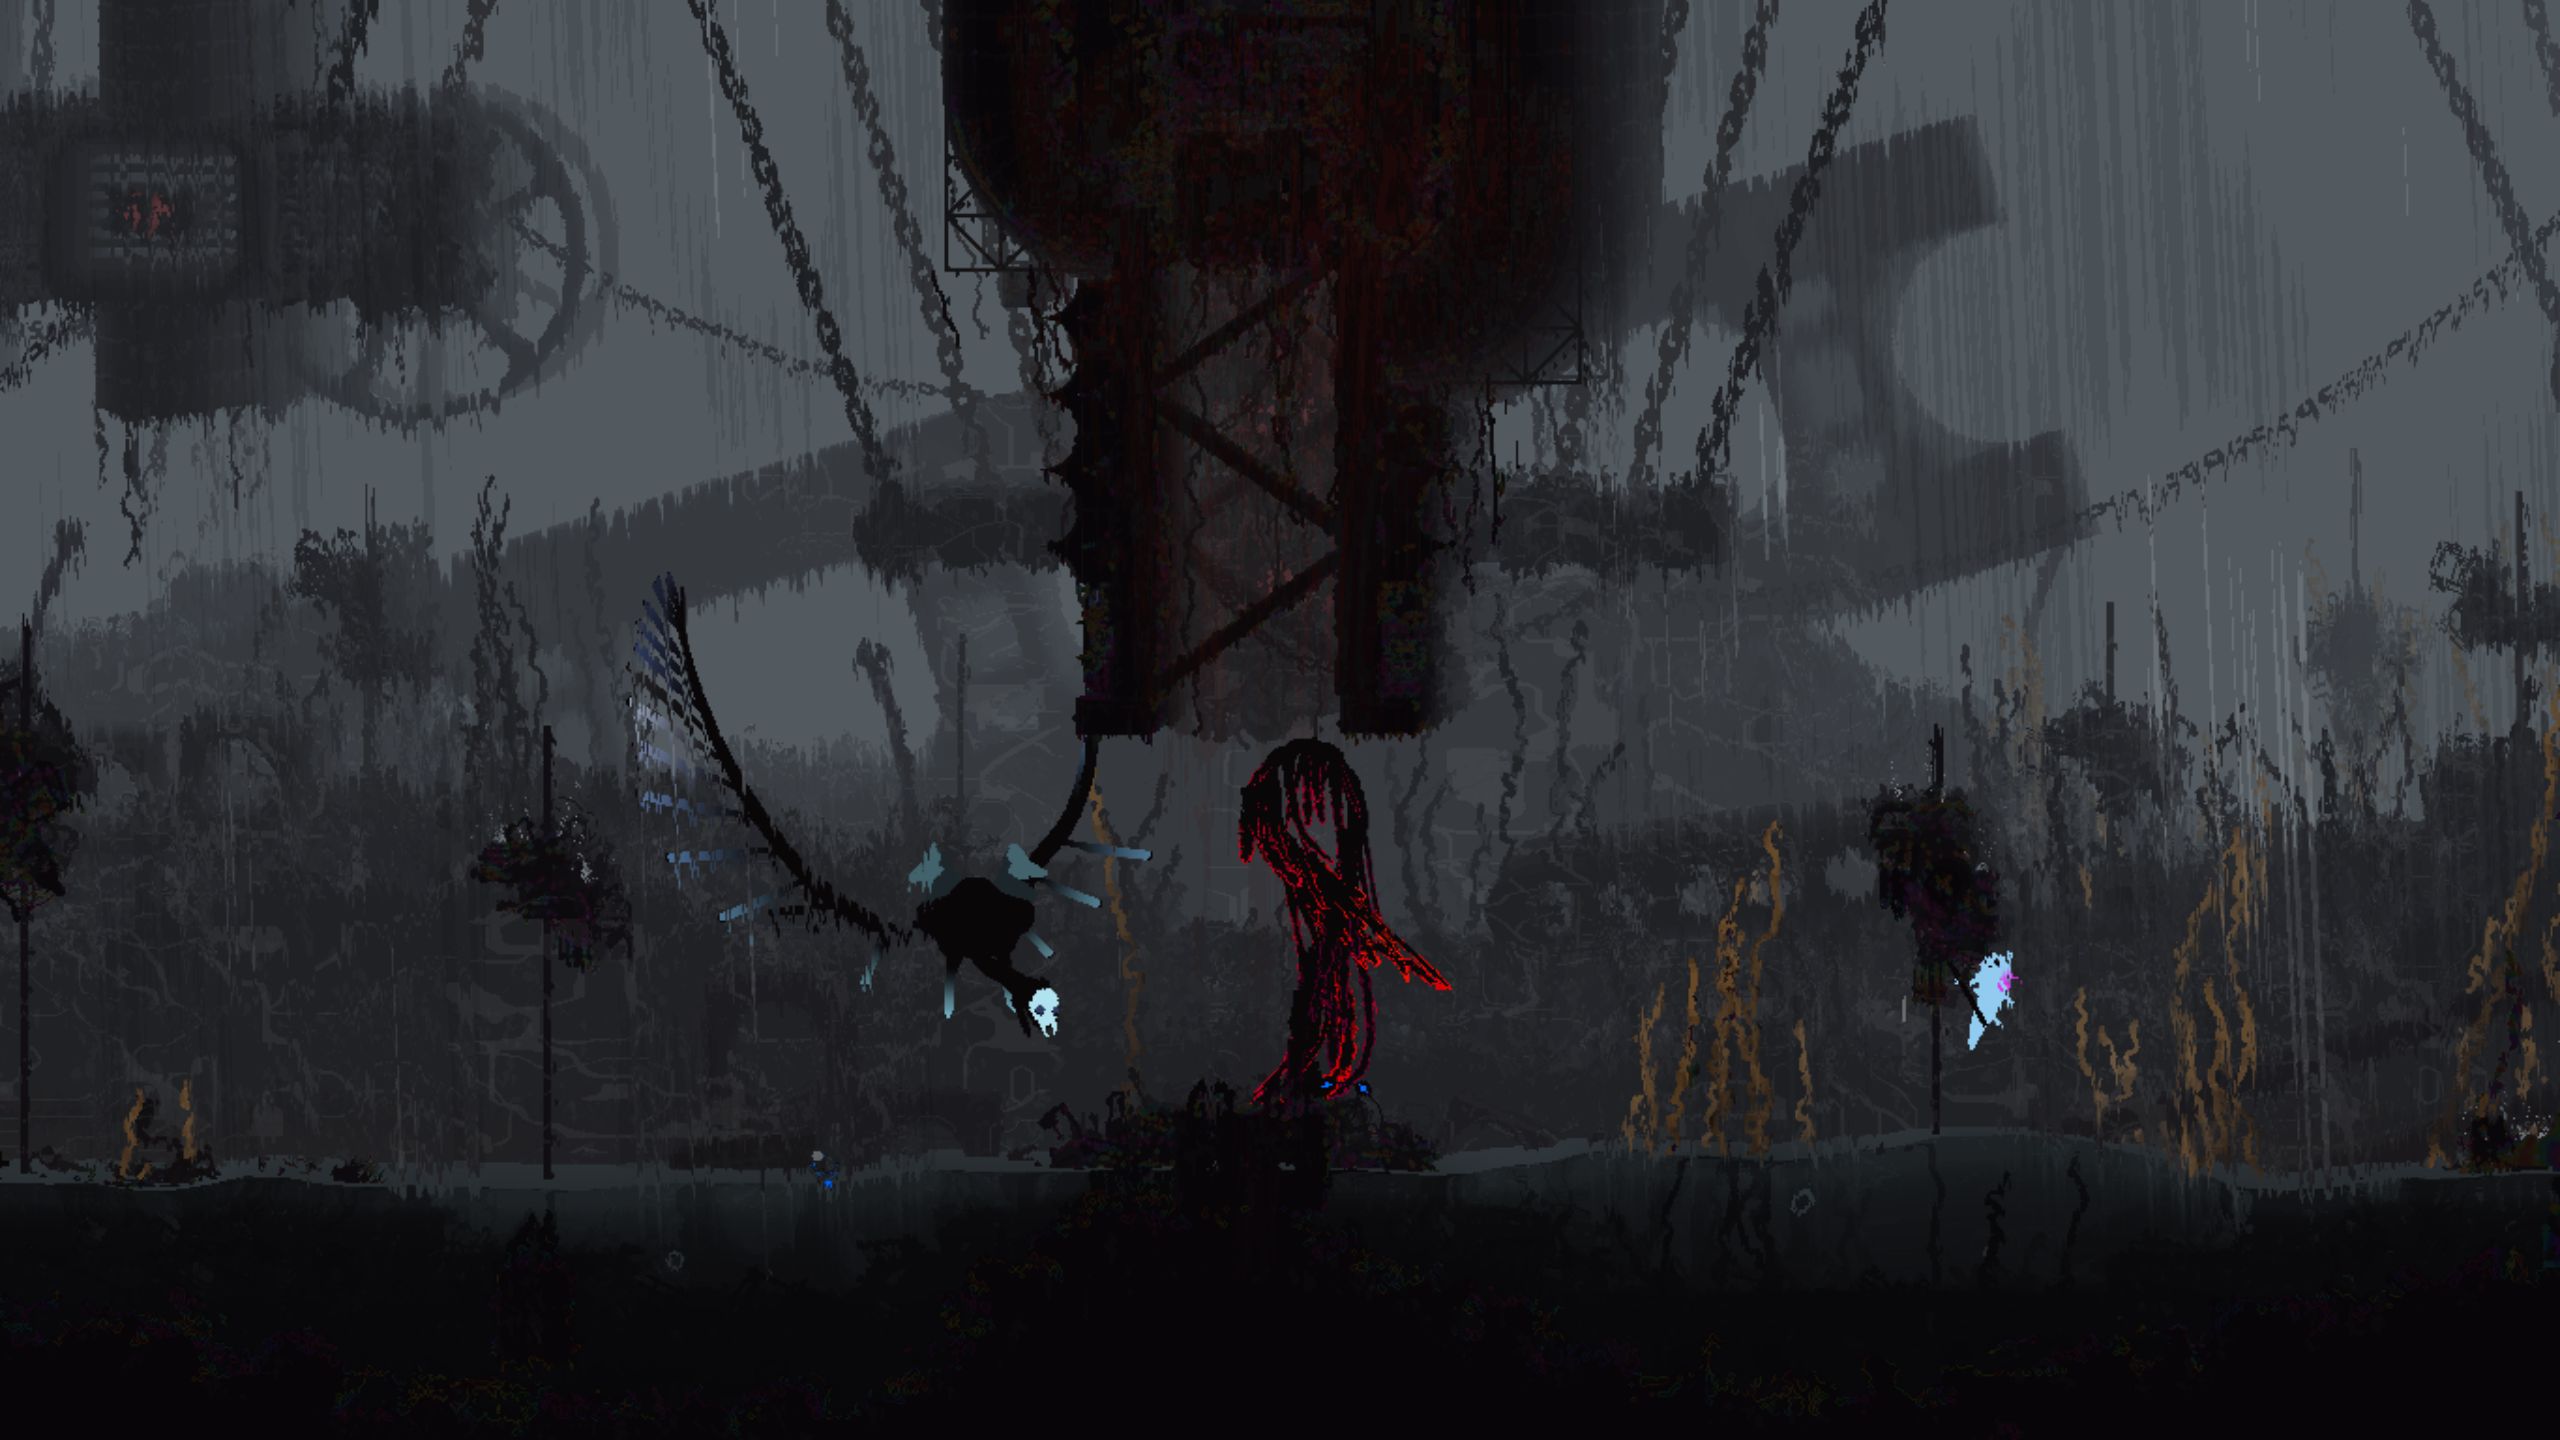 A pale blue slug cat creature (the player character in Rain World Downpour) hides on the right side of a rainy, gray, post-apocalyptic landscape, as a strange winged creature with a skull-like face divebombs the left side